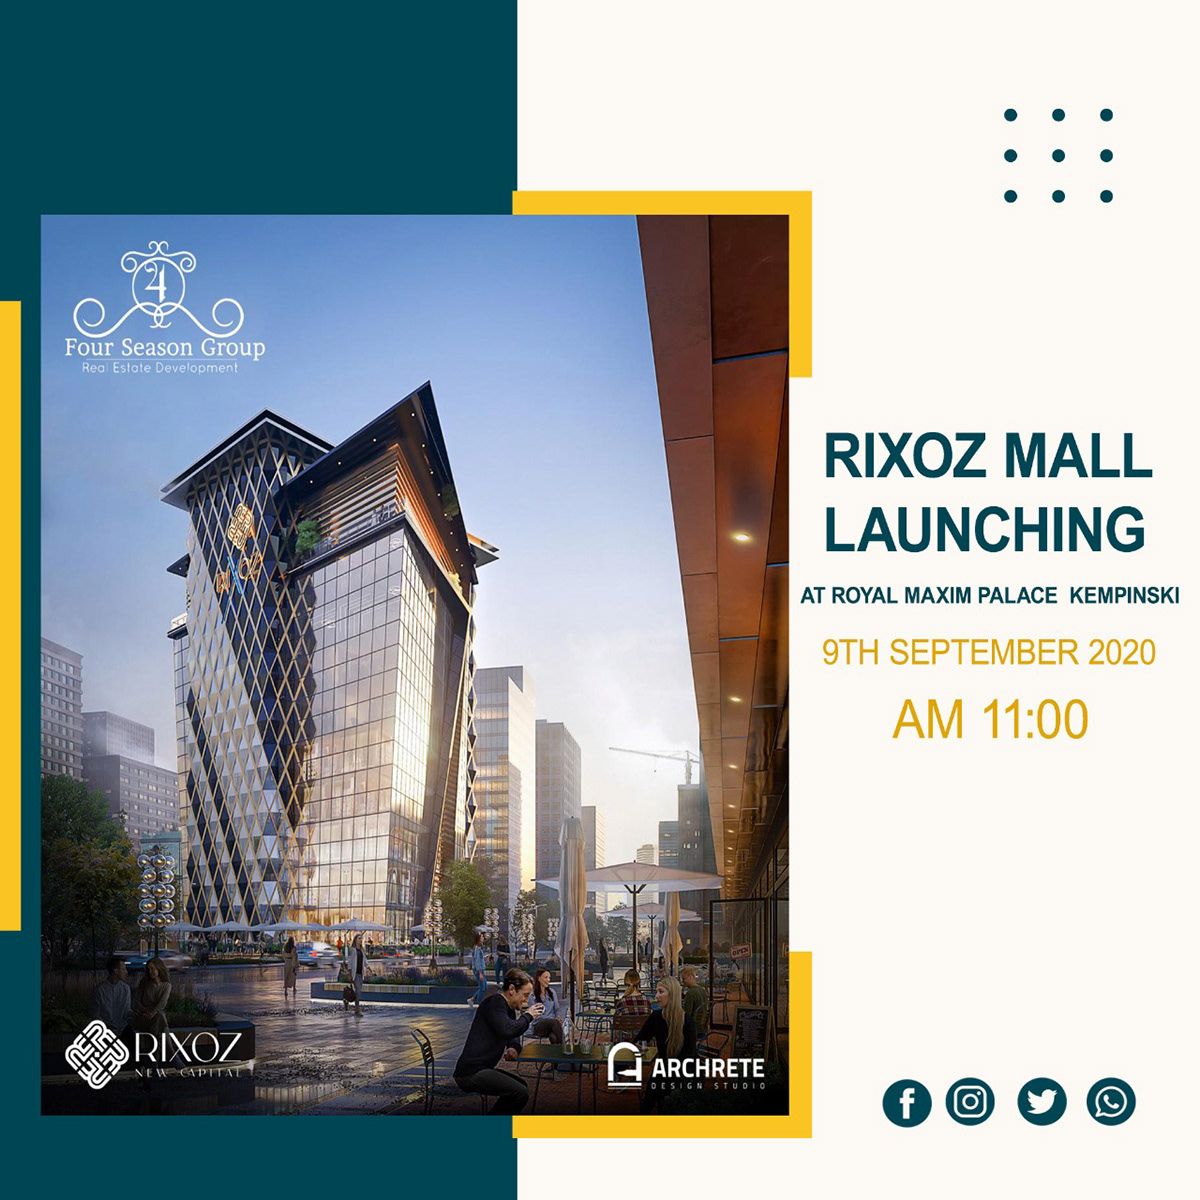 Blue Mall downtown area evira mall Four Seasons Group R7 mall #social ads real estates